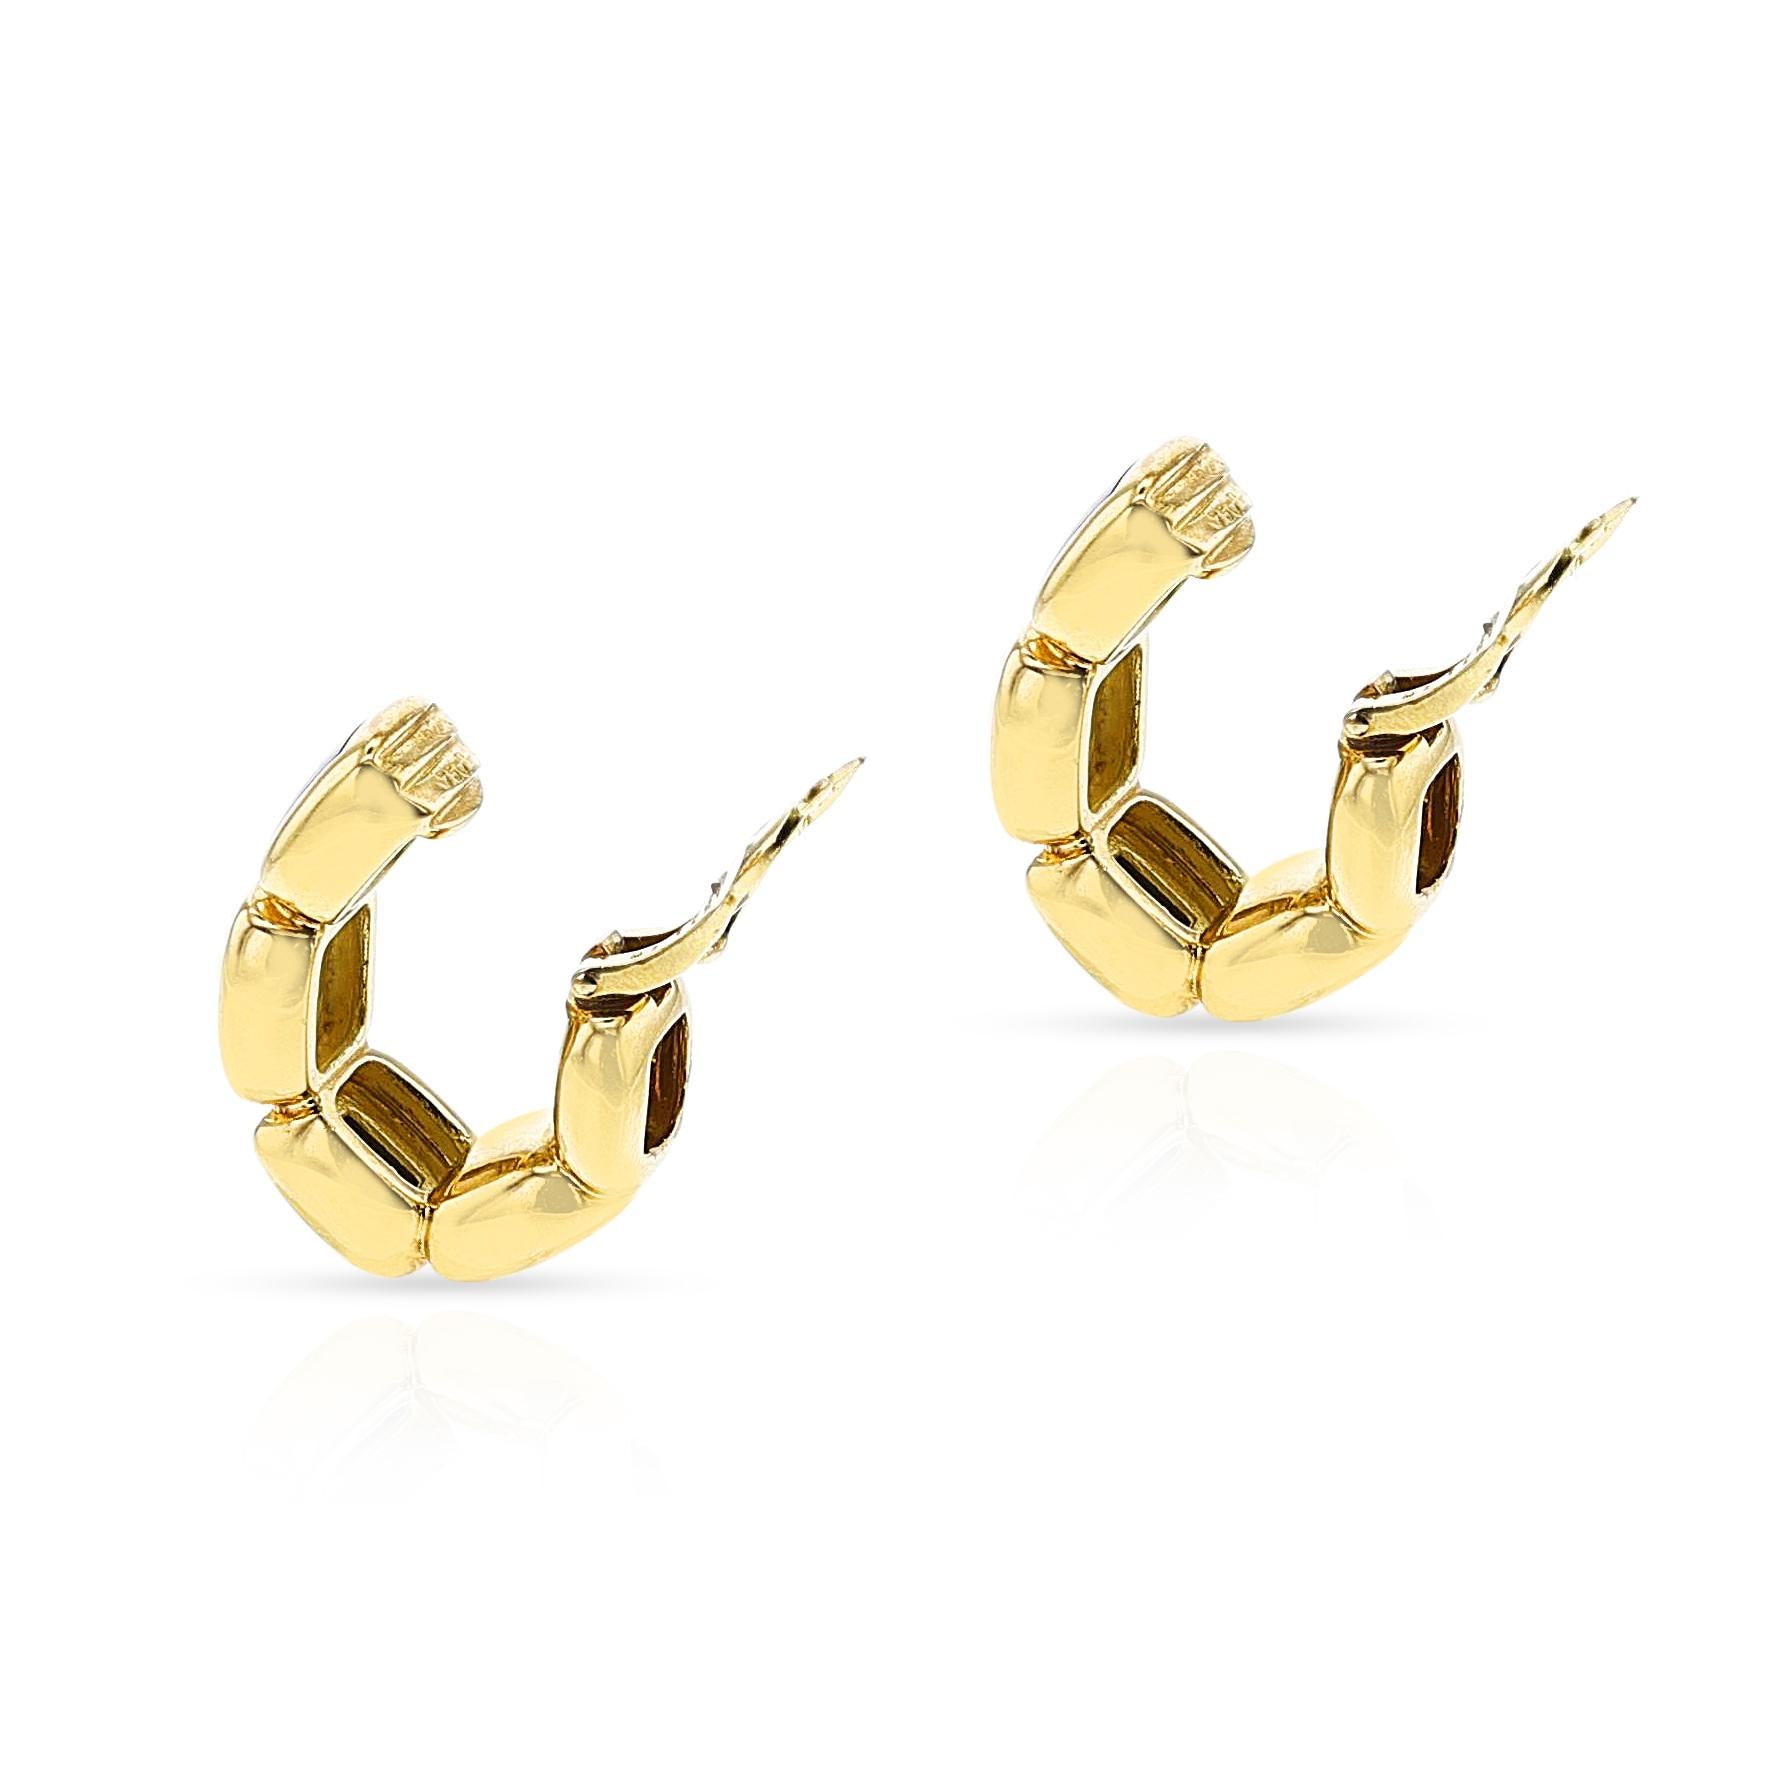 Van Cleef & Arpels Mabe Pearl Hoop Earrings, 18k In Excellent Condition For Sale In New York, NY